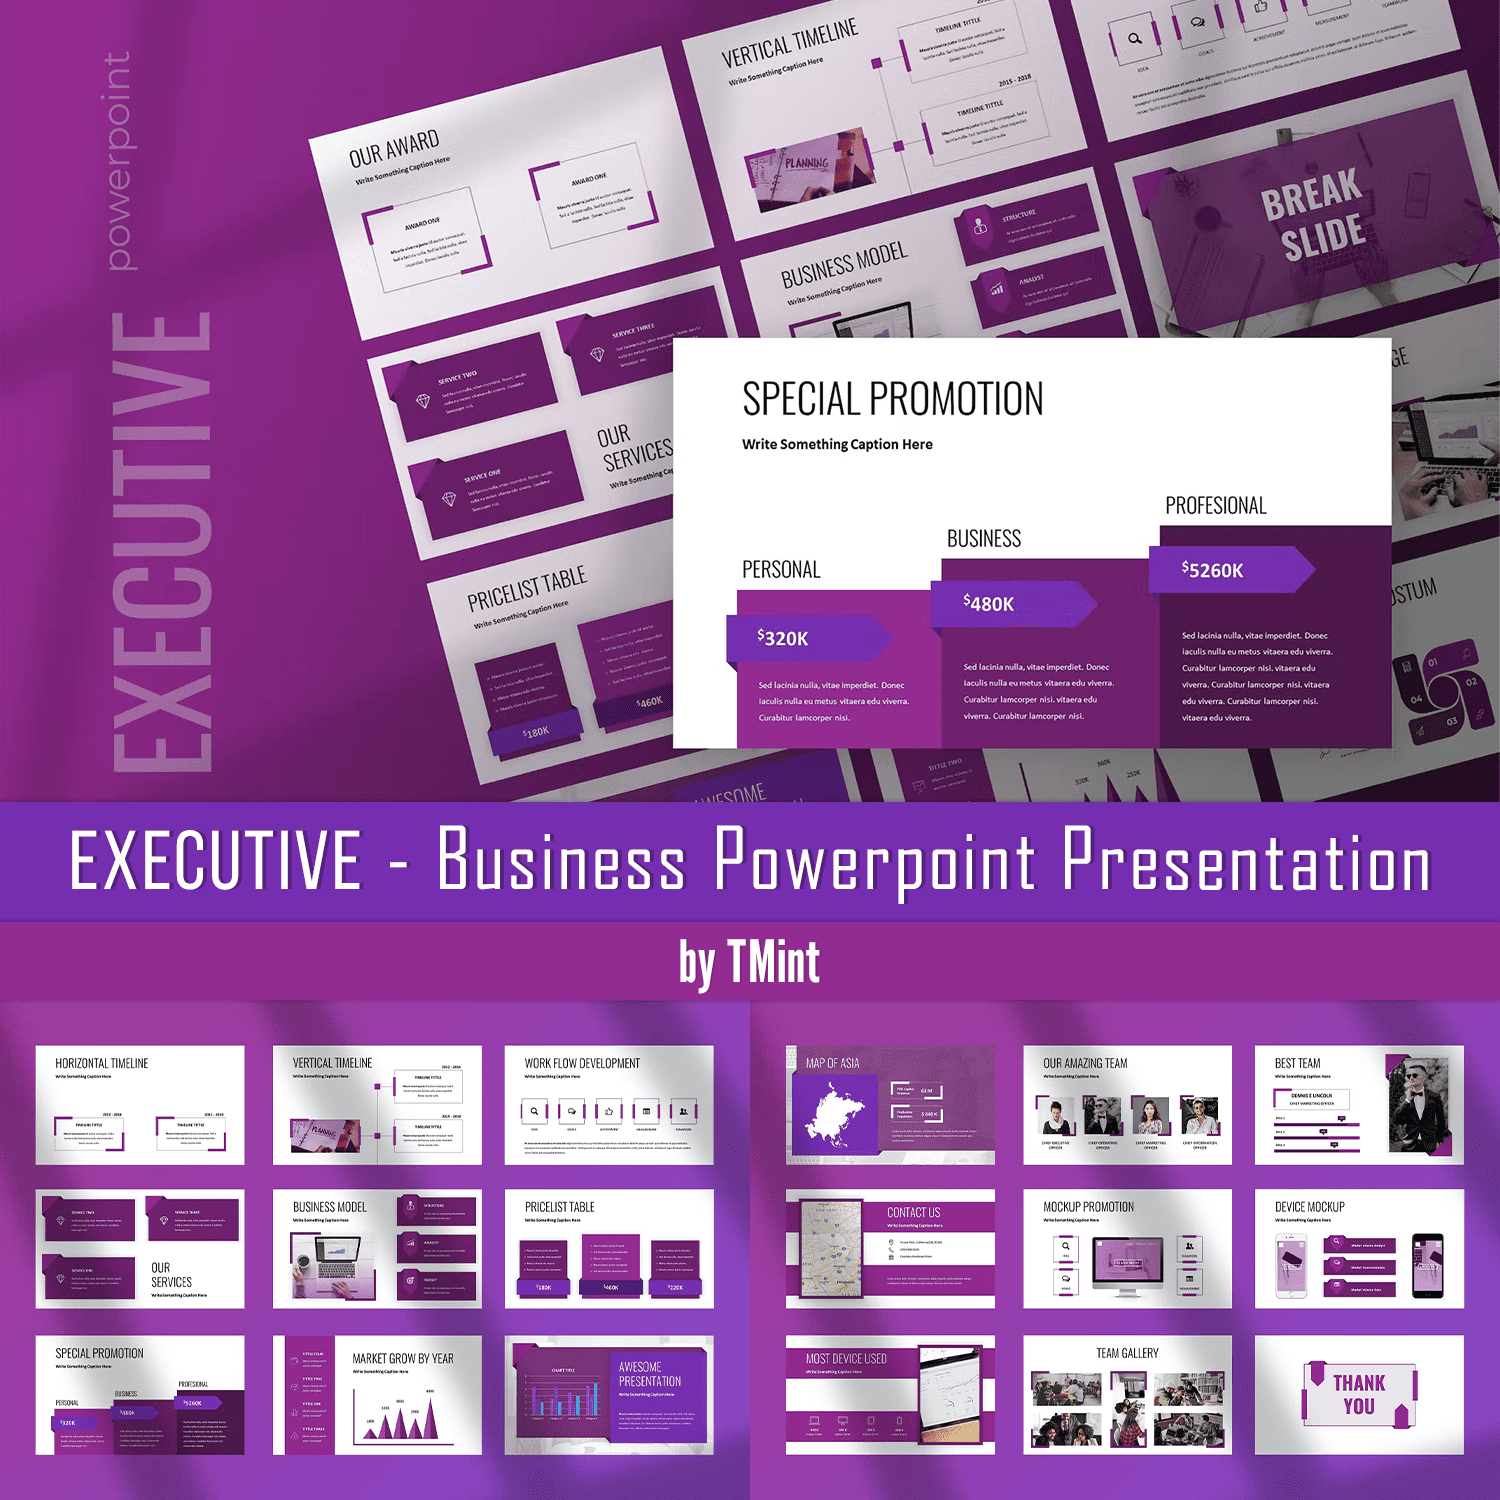 Executive - Powerpoint Presentation For Business.